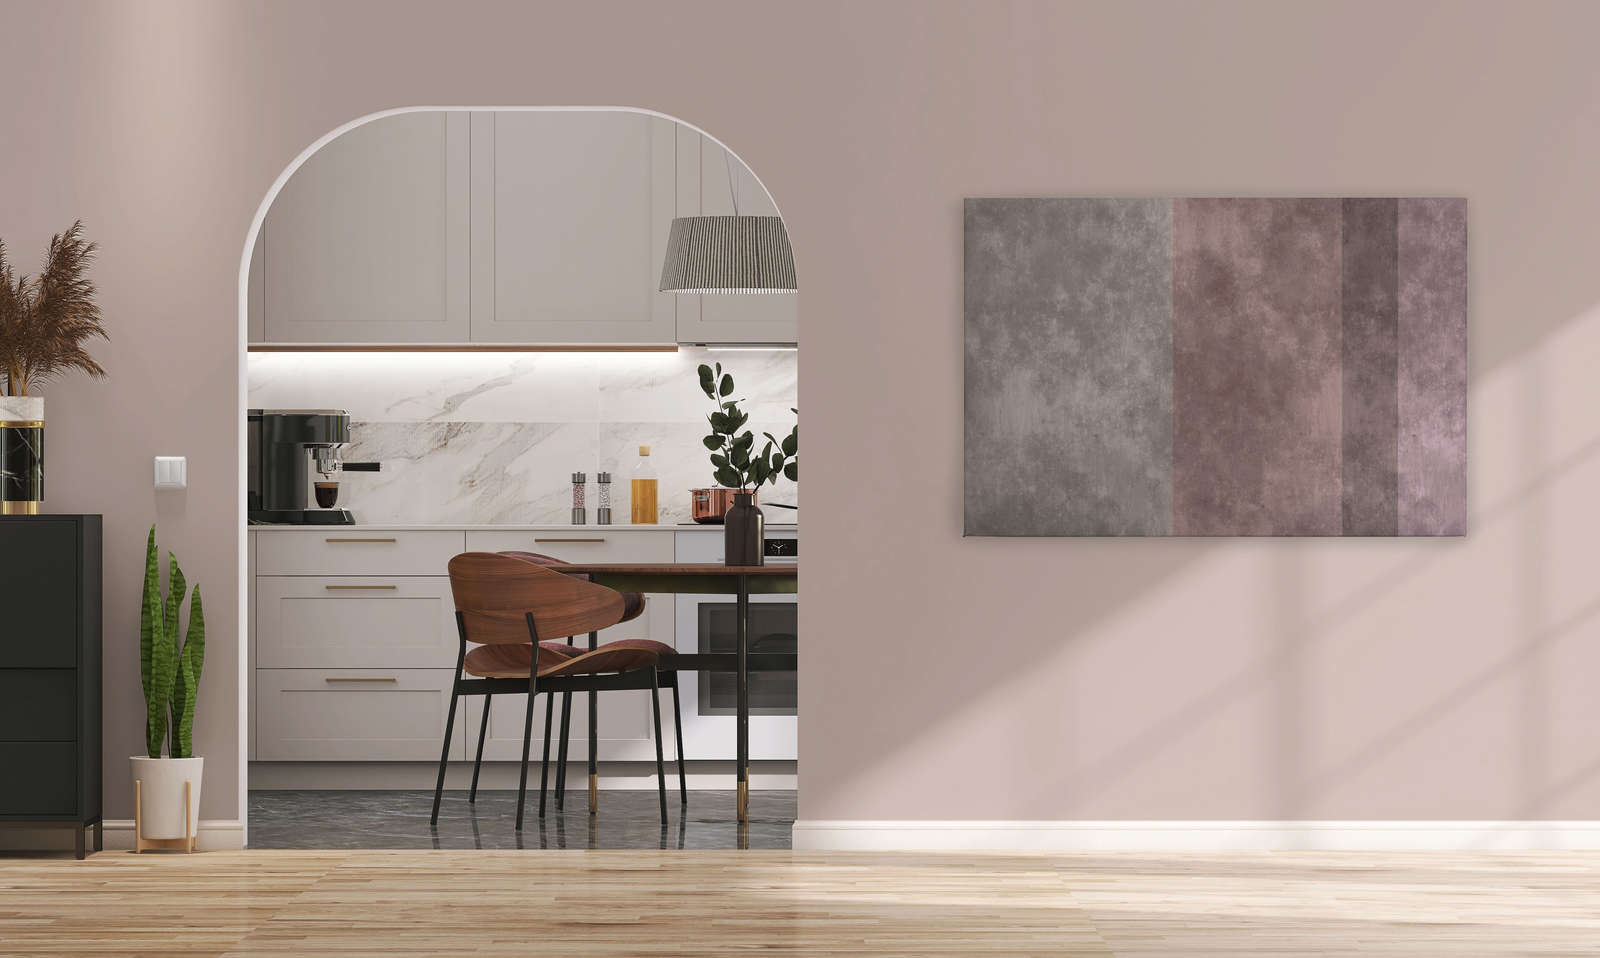             Concrete-look canvas picture with stripes | grey, pink - 1.20 m x 0.80 m
        